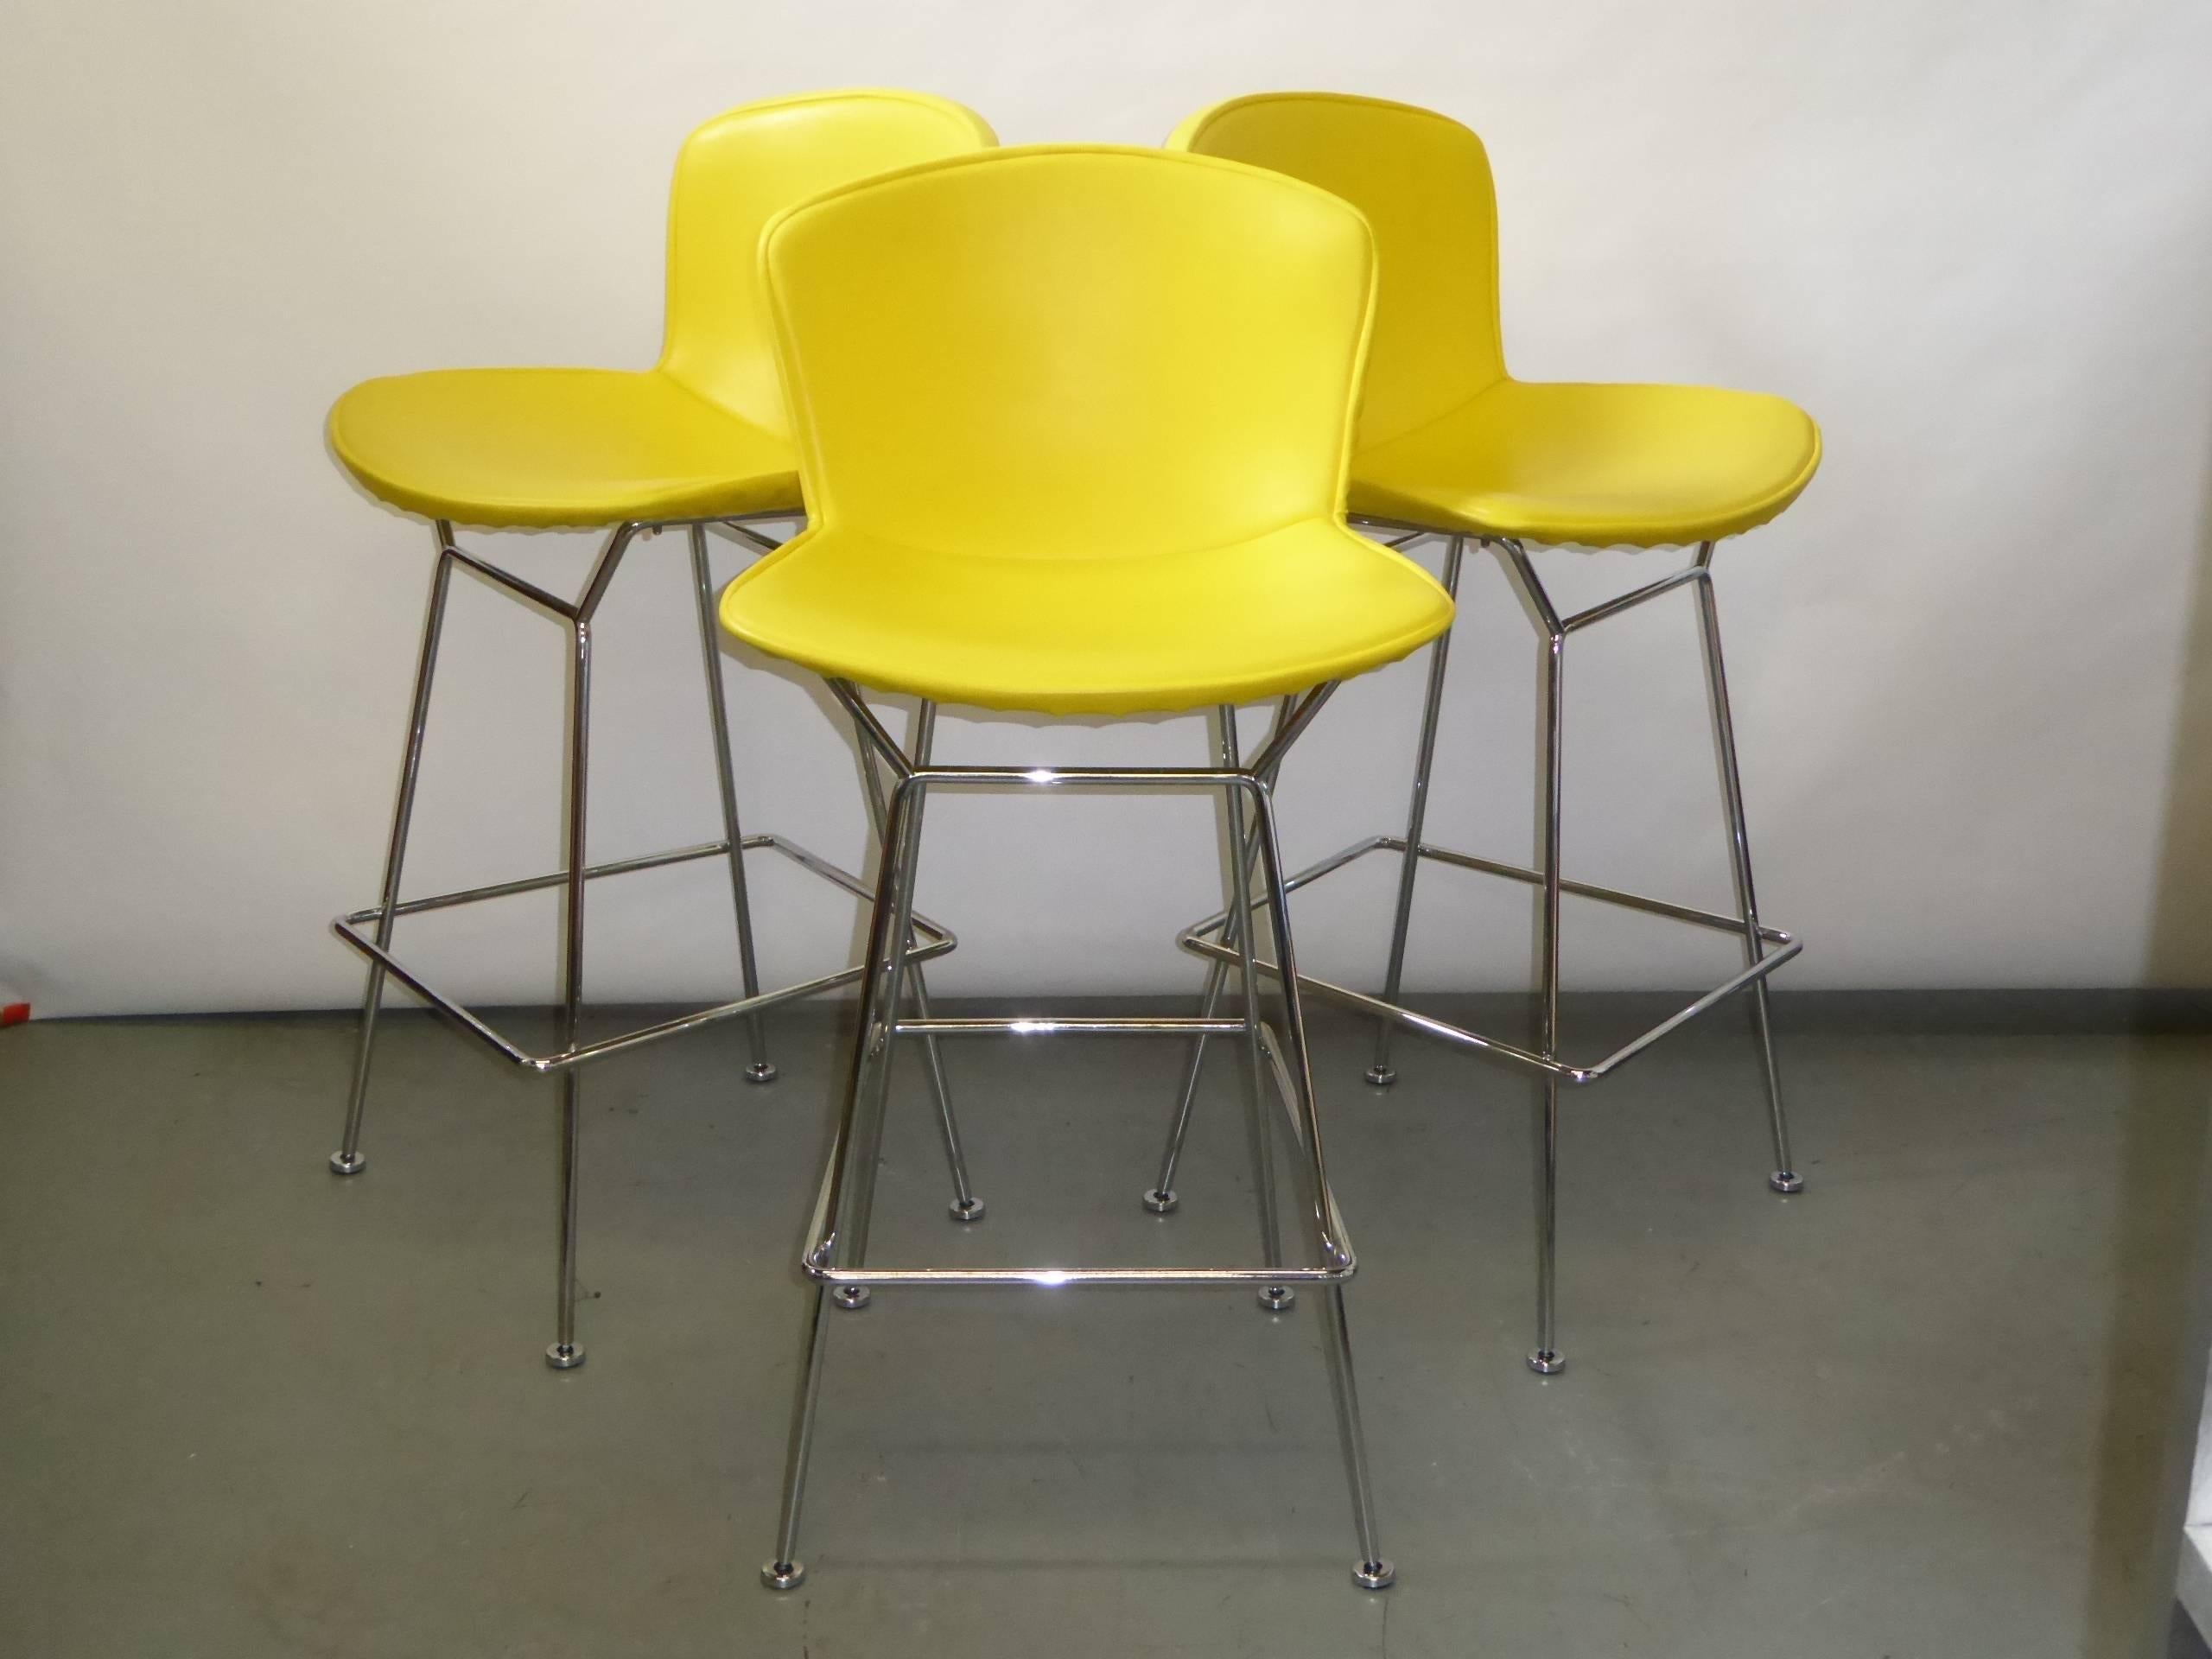 SOLD... Iconic 1952 by Harry Bertoia design for Knoll, three chromed steel bar stools with full leatherette vinyl upholstery in Sunflower yellow.  Full upholstery not available anymore from Knoll.
Seat and base are constructed of welded steel rods